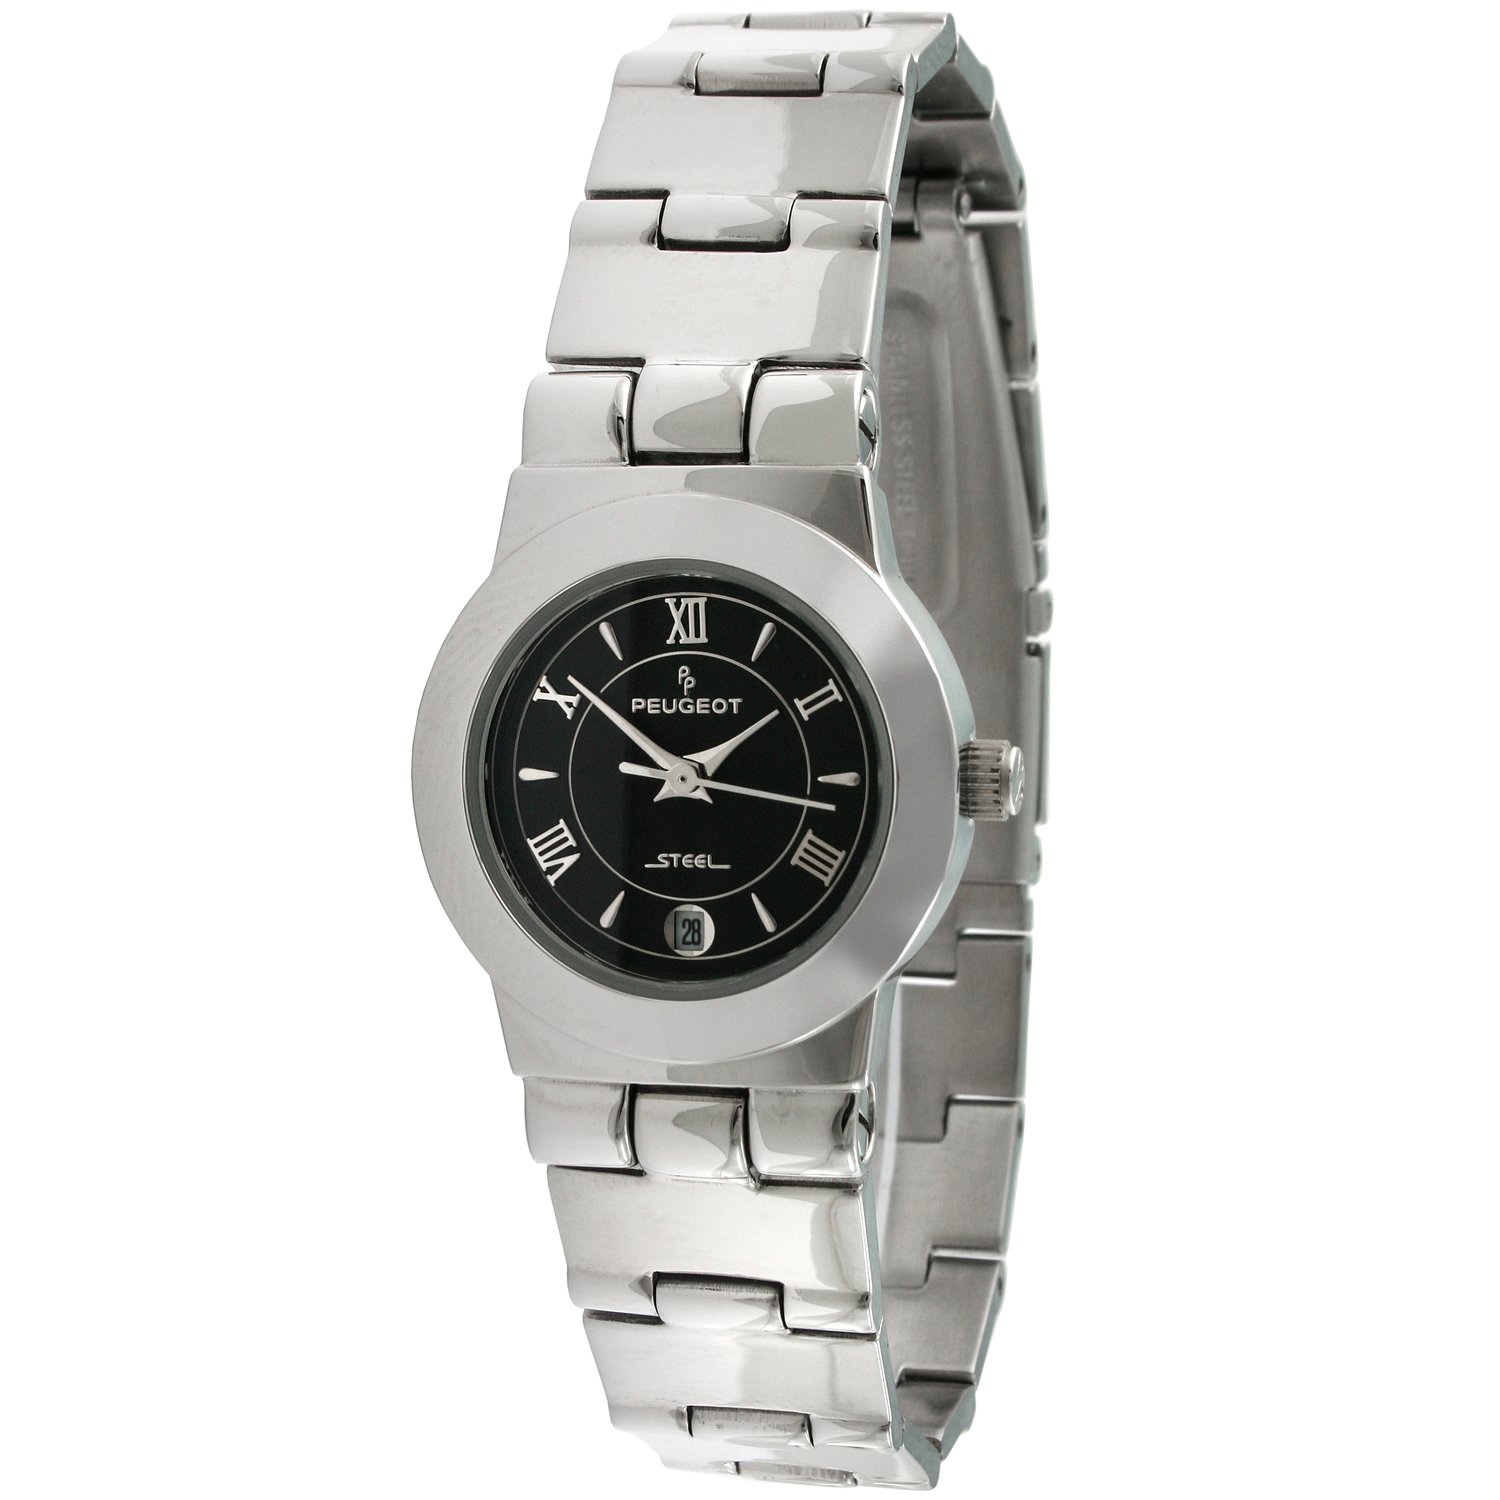 Peugeot Women's Japanese Quartz Wrist Watch with 25mm Roman Numerals Dial and Stainless Steel Bracelet